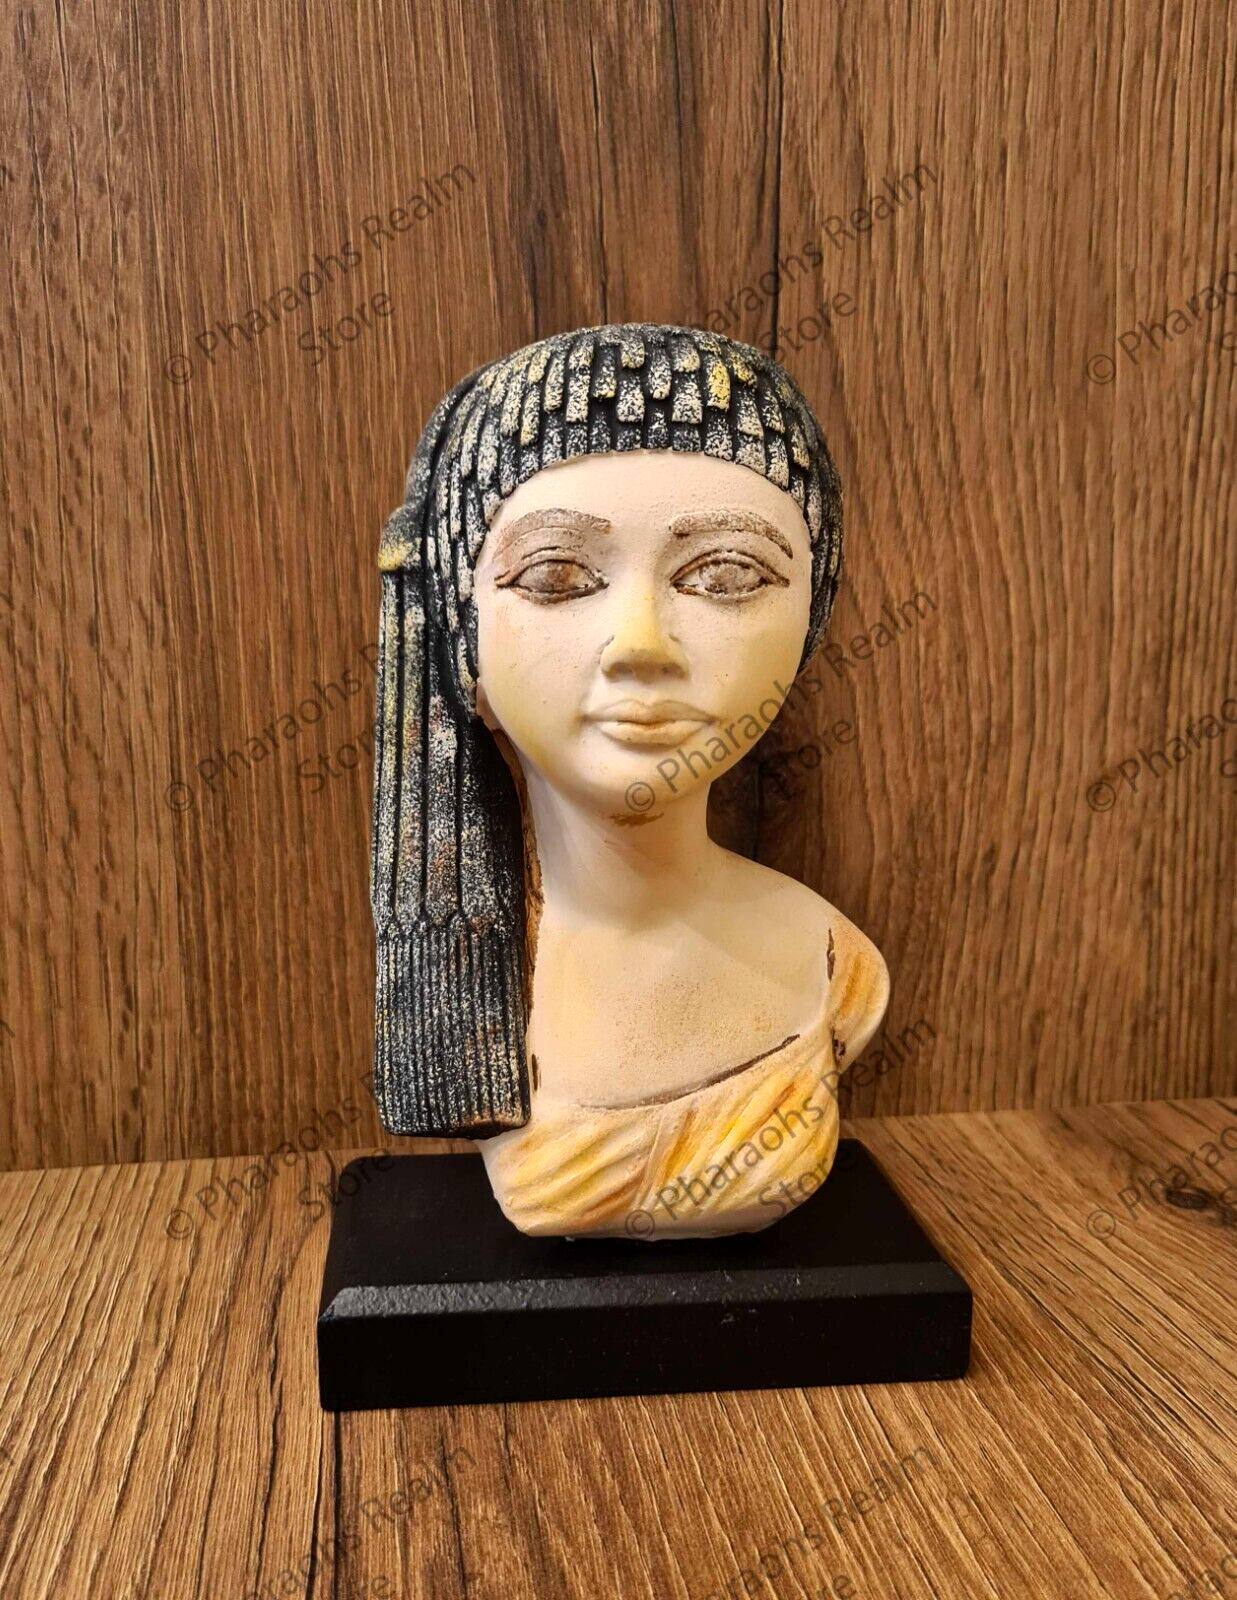 A one-of-a-kind replica bust of Princess Meritaten from ancient Egypt